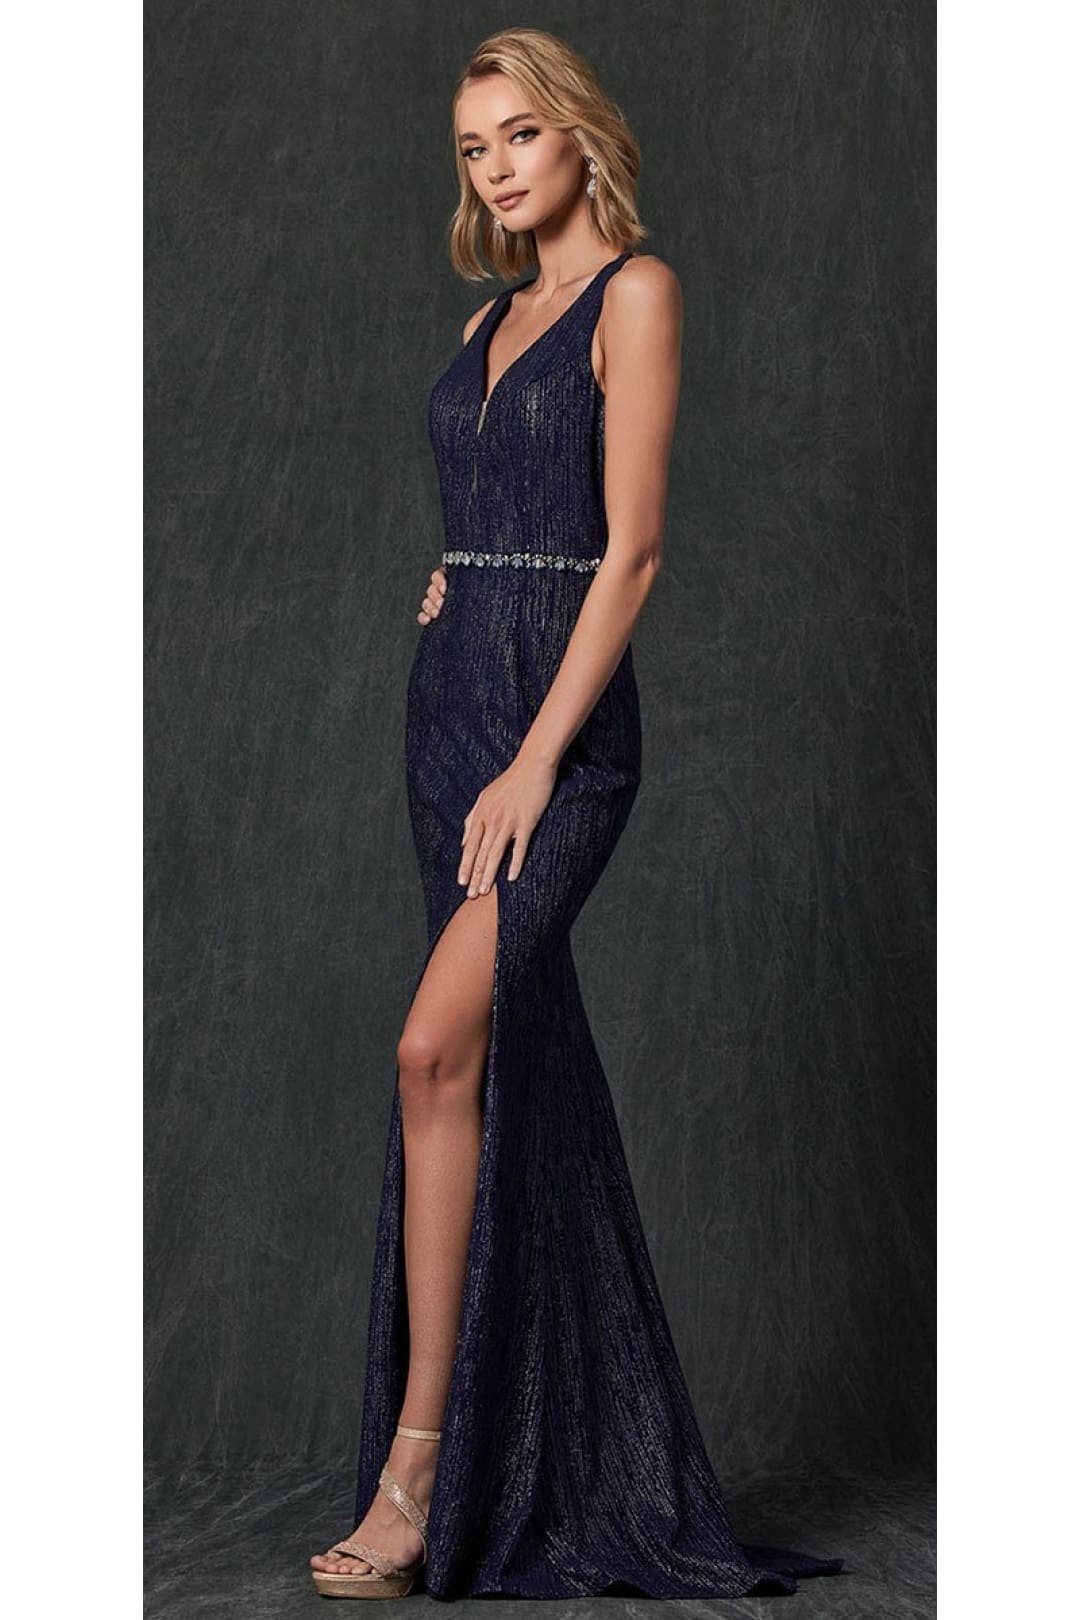 Strappy Formal Evening Gown